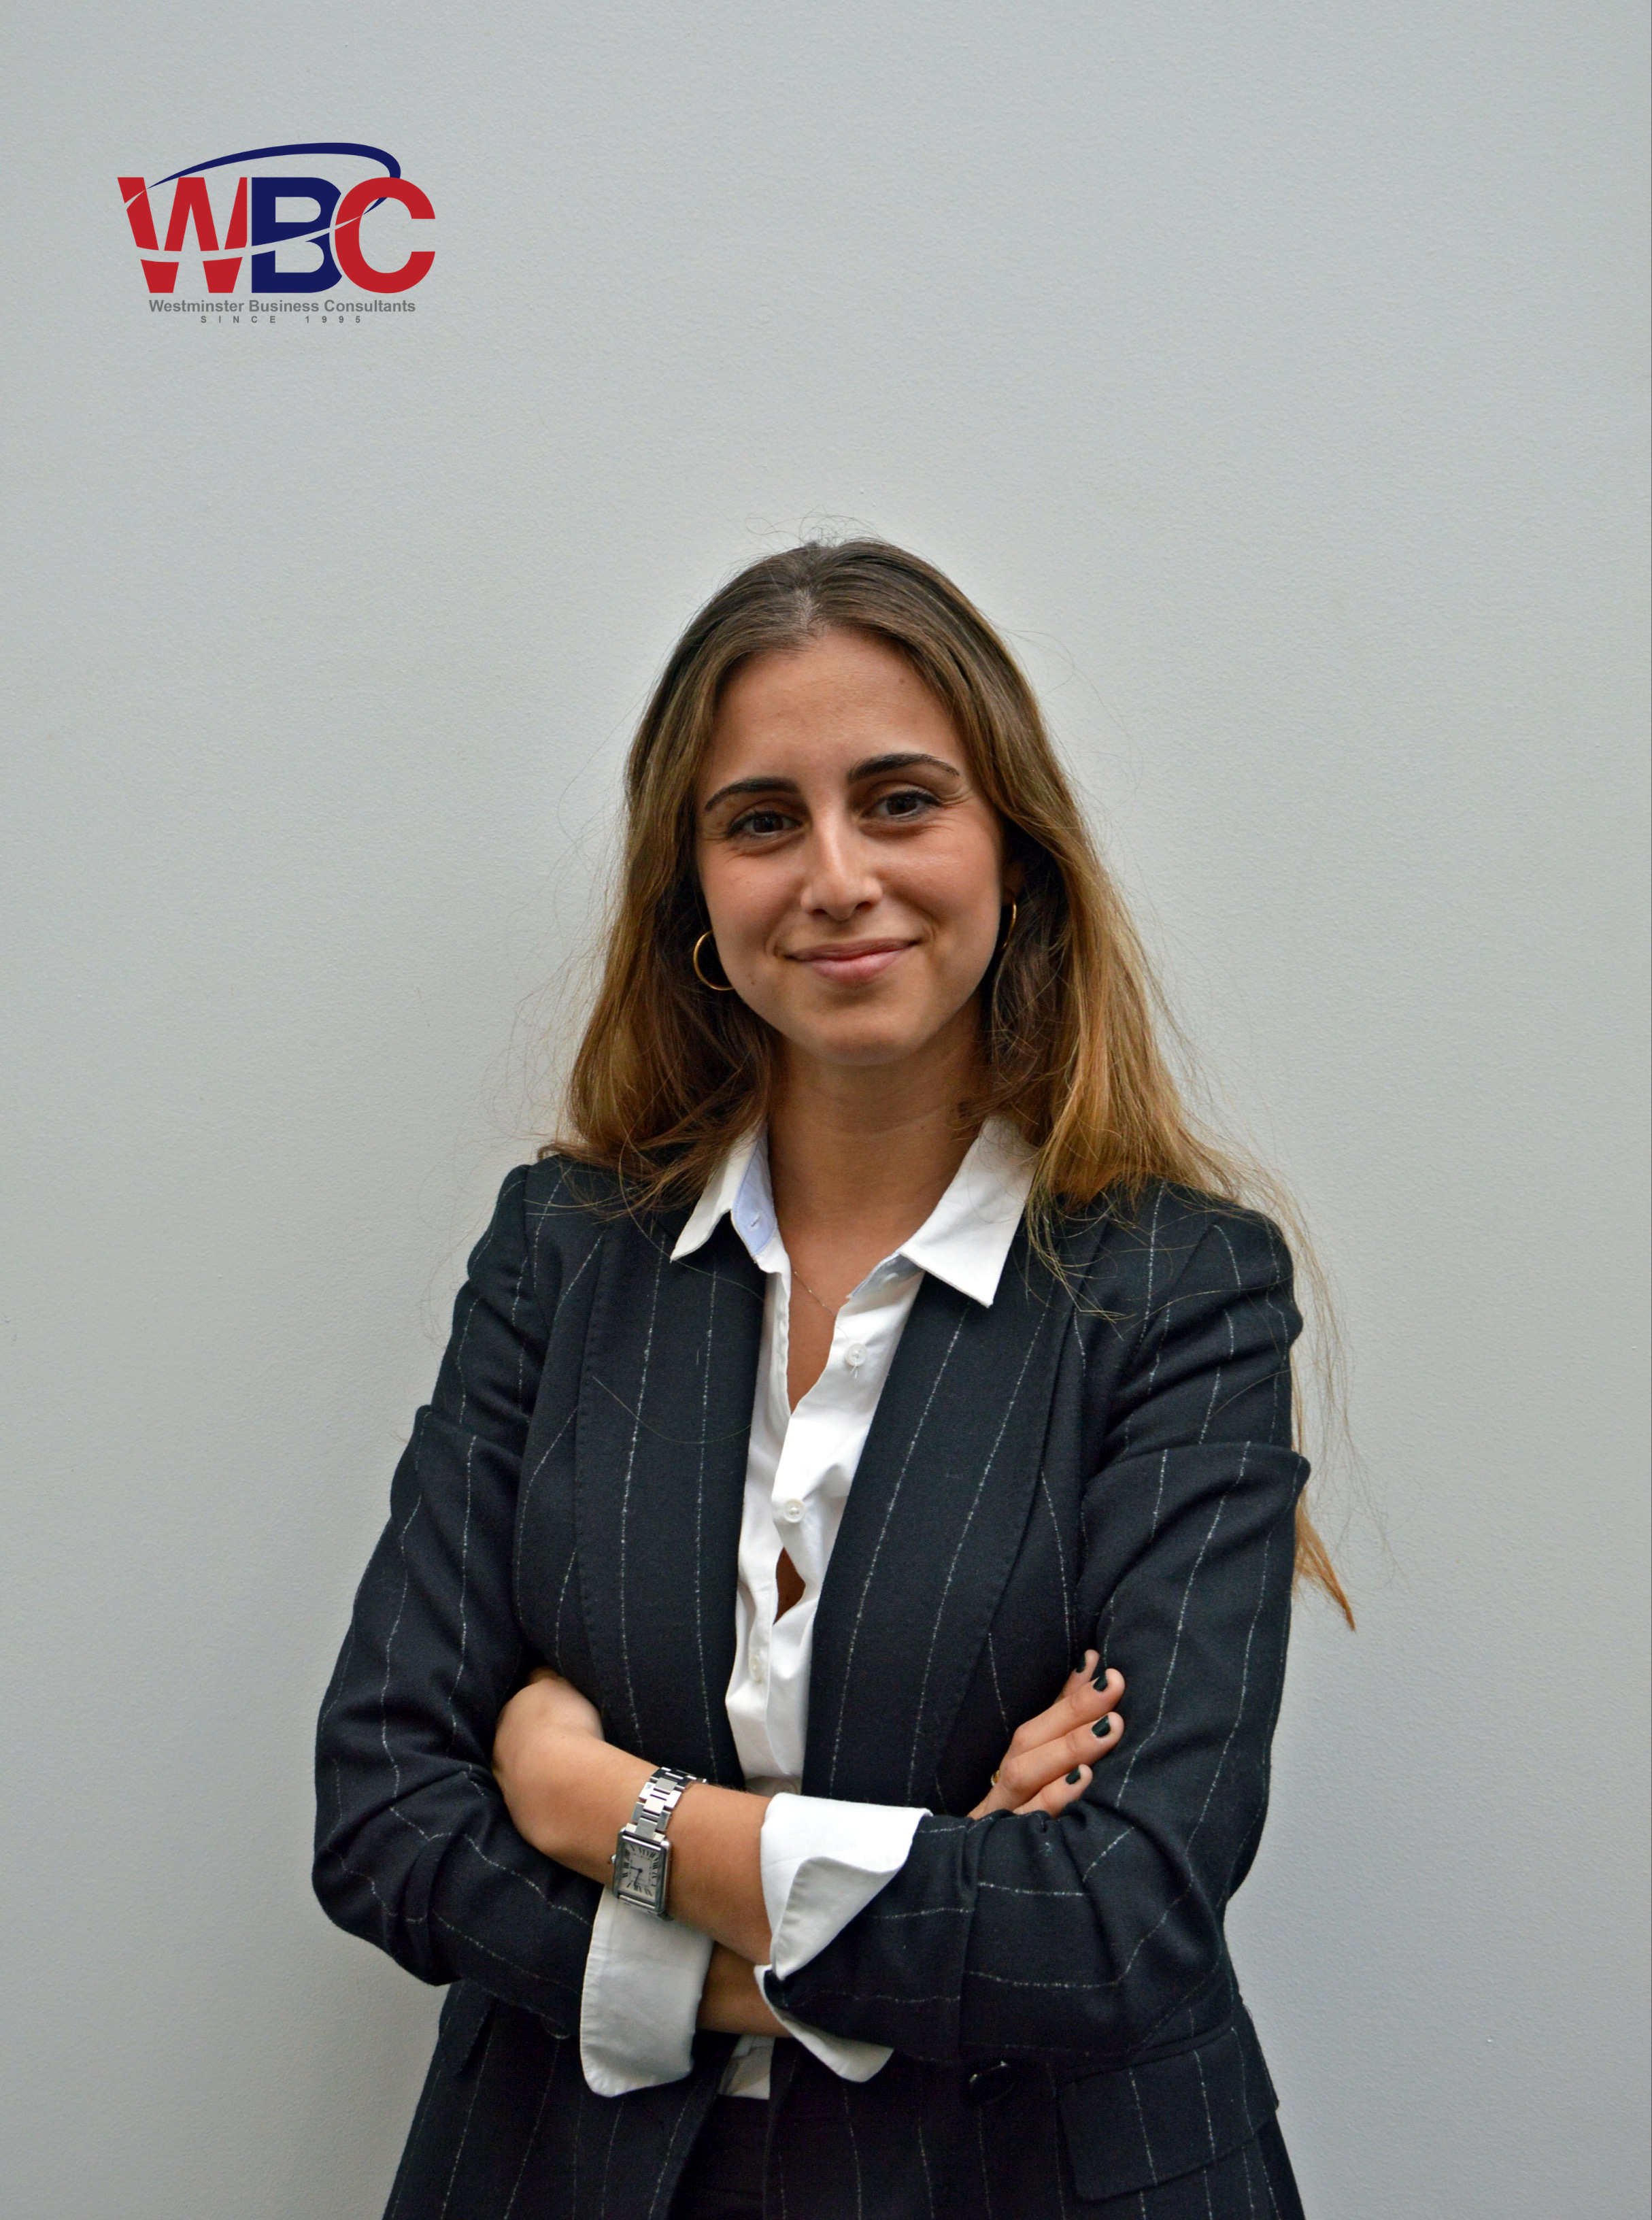 Marina Paez, former Westminster Business Consultants' Marketing and Events consultant